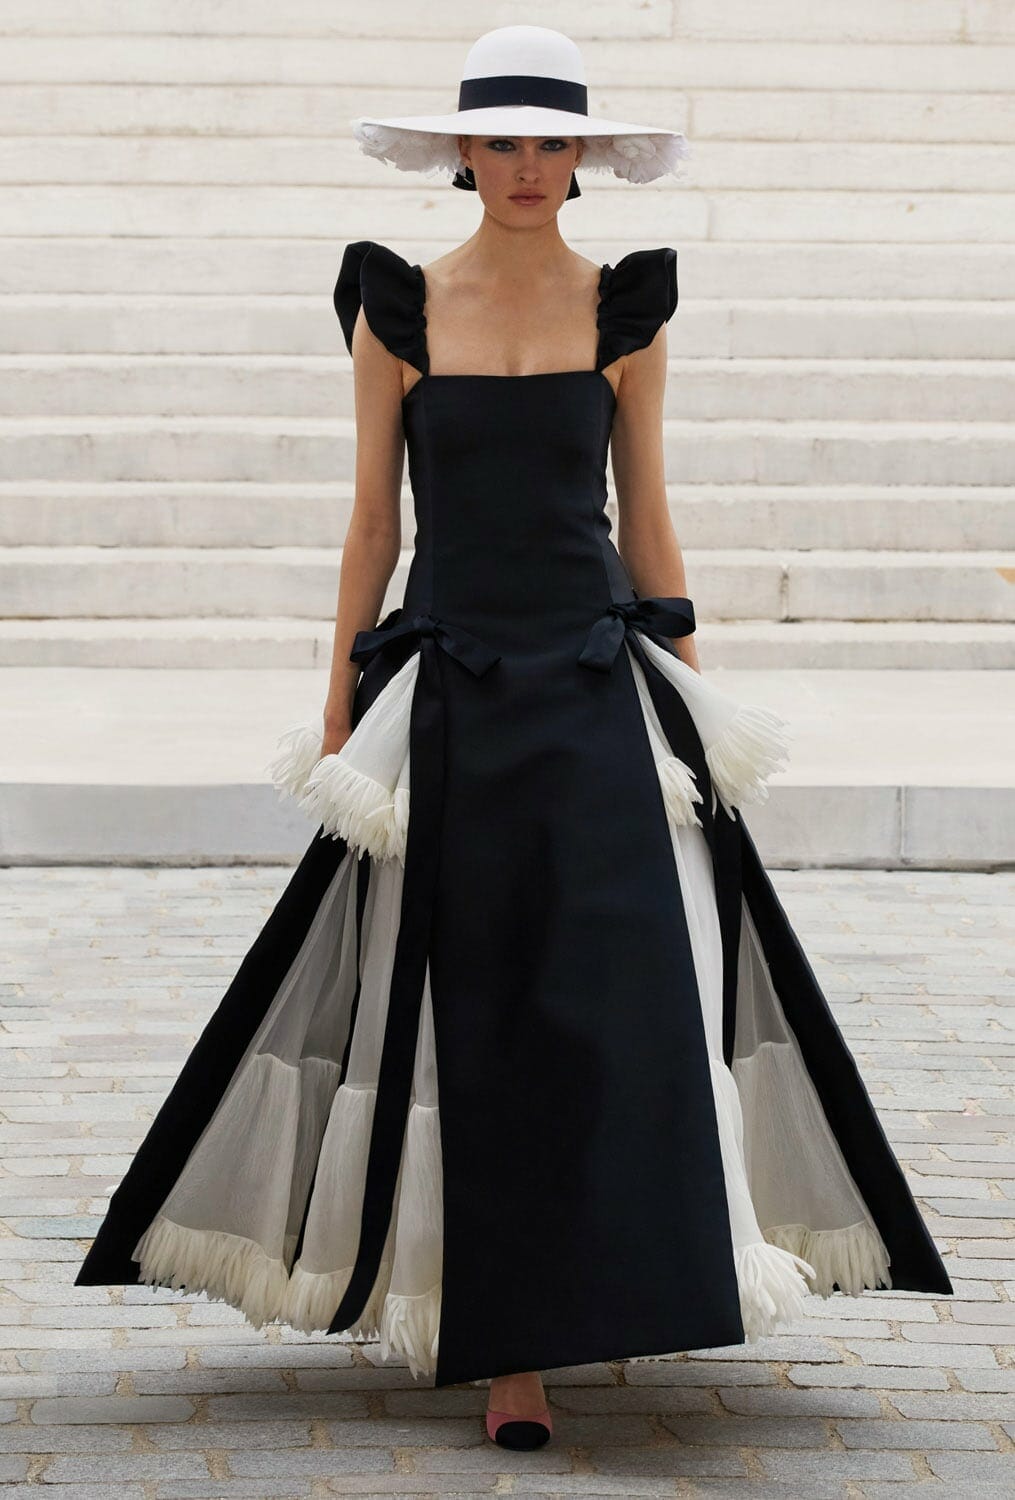 Chanel Haute Couture Fall Winter 2021-2022 - RUNWAY MAGAZINE ® Official